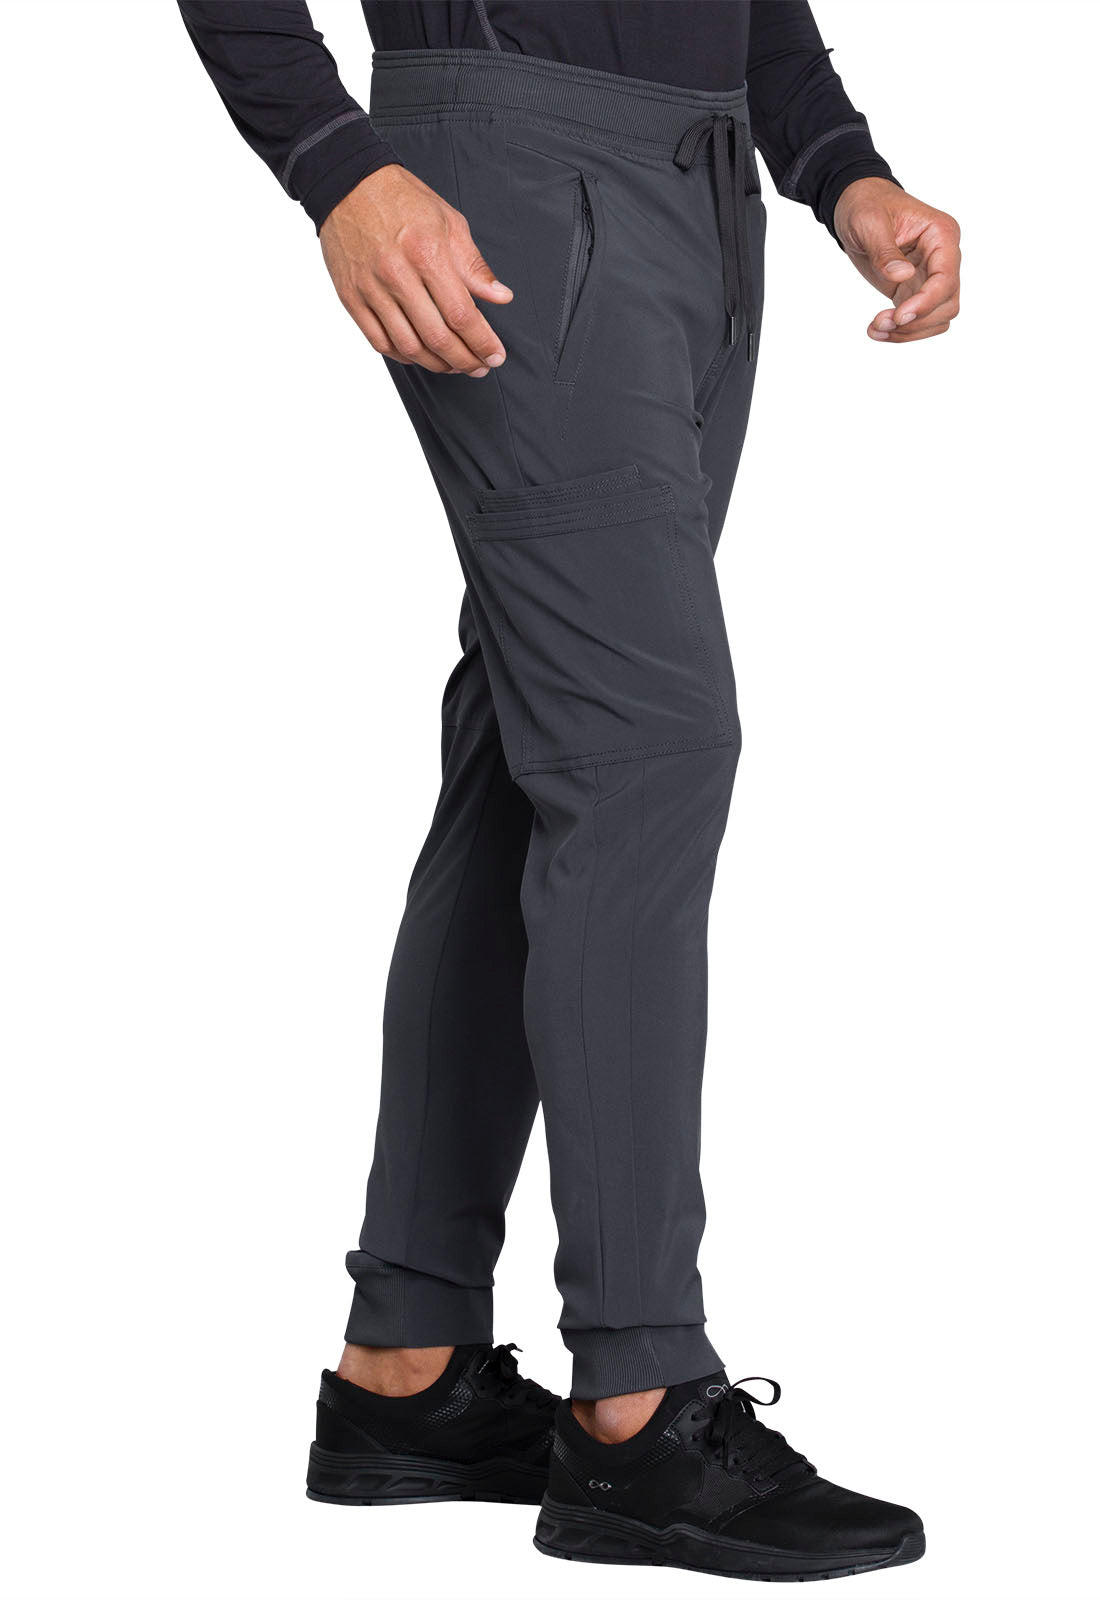 Cherokee Infinity CK004A Men's Jogger Scrub Pant Pewter Side